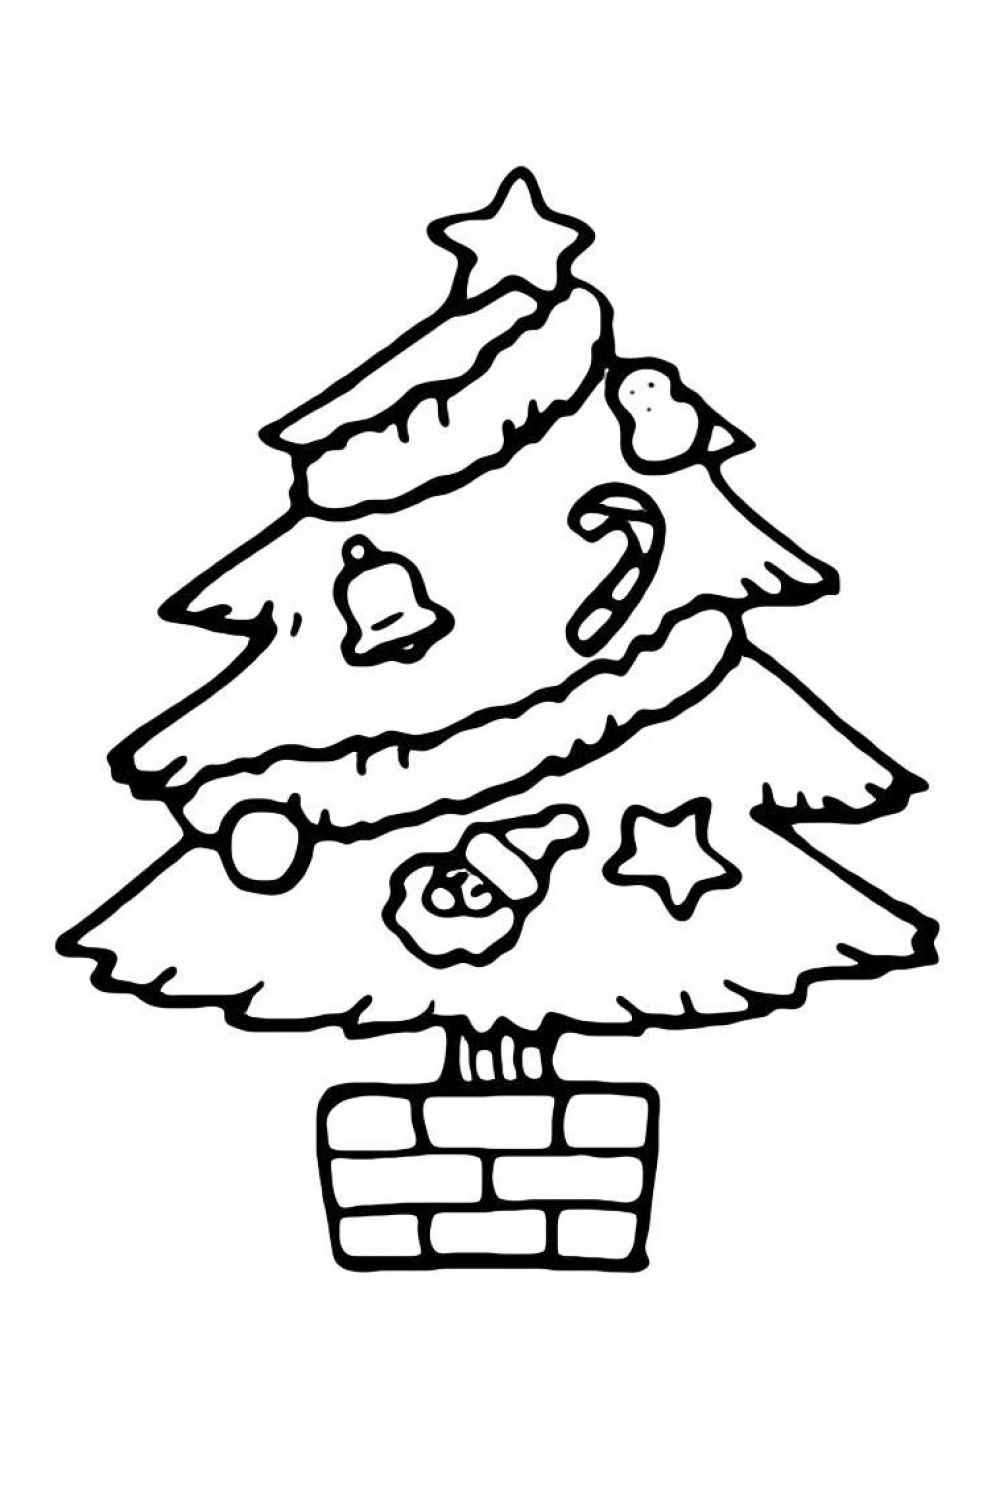 Coloring Pages Christmas. Collection of coloring books for the holiday